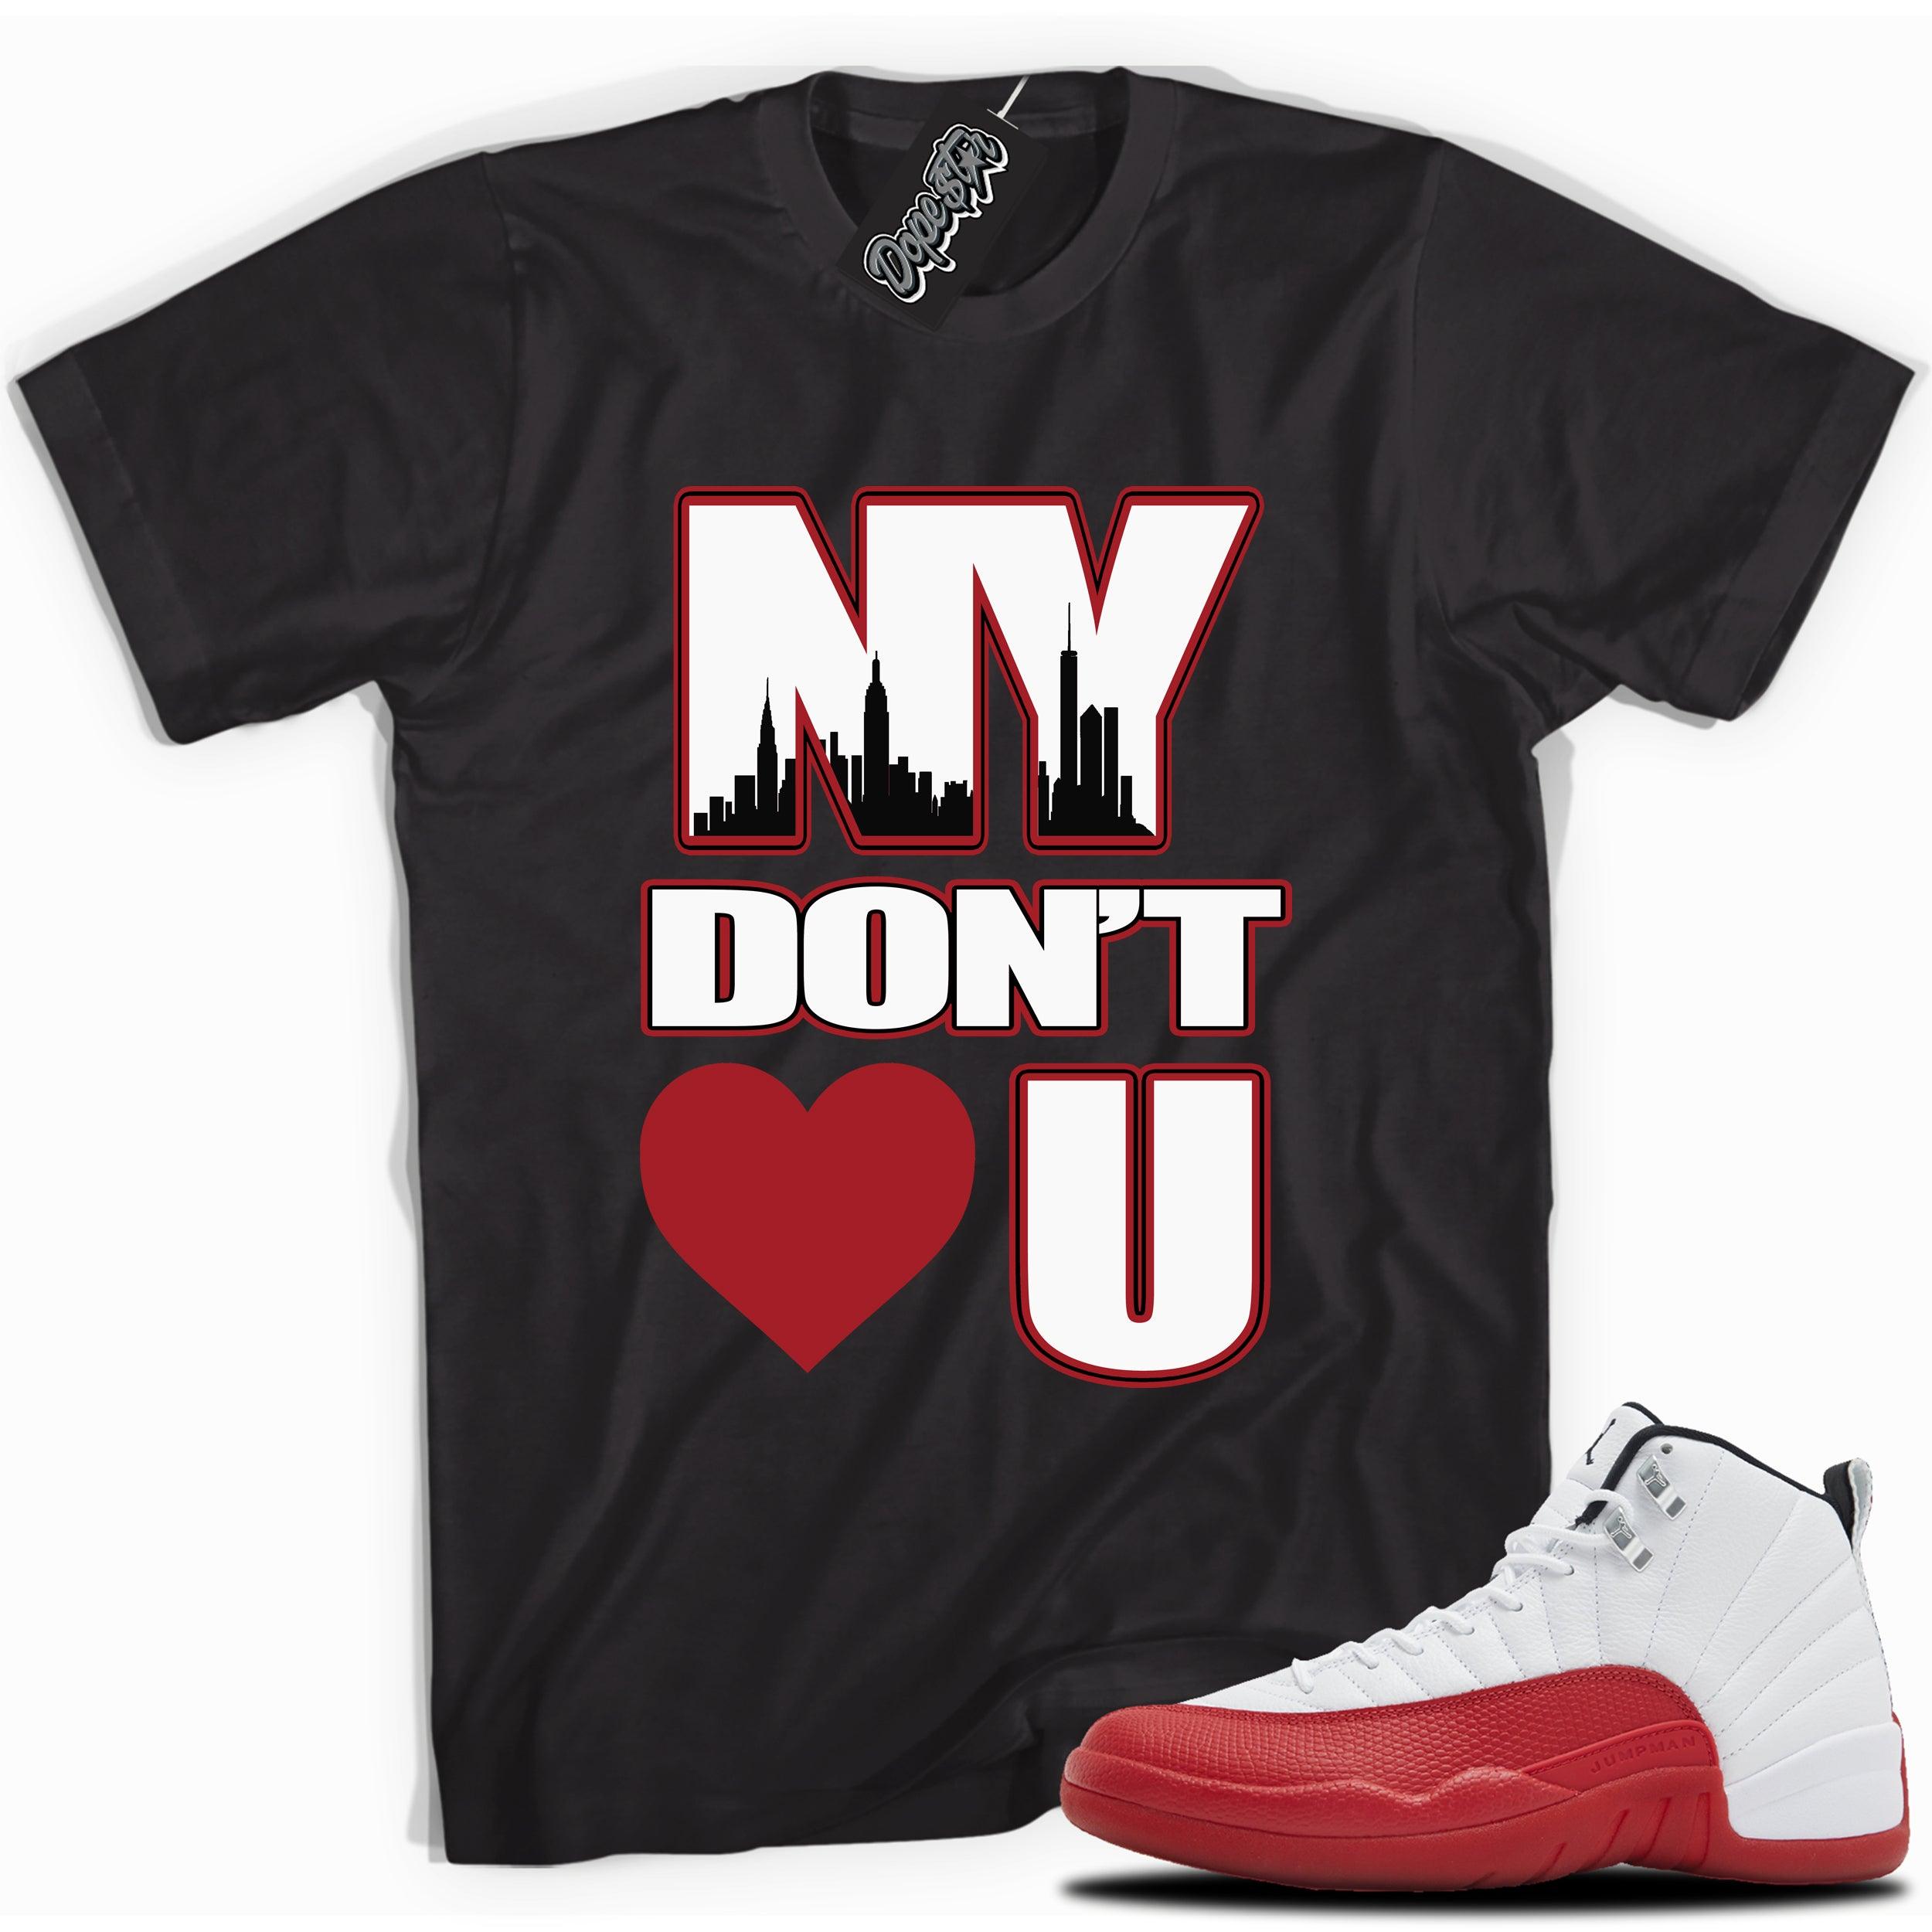 Cool Black graphic tee with “NY DONT LOVE YOU” print, that perfectly matches Air Jordan 12 Retro Cherry Red 2023 red and white sneakers 